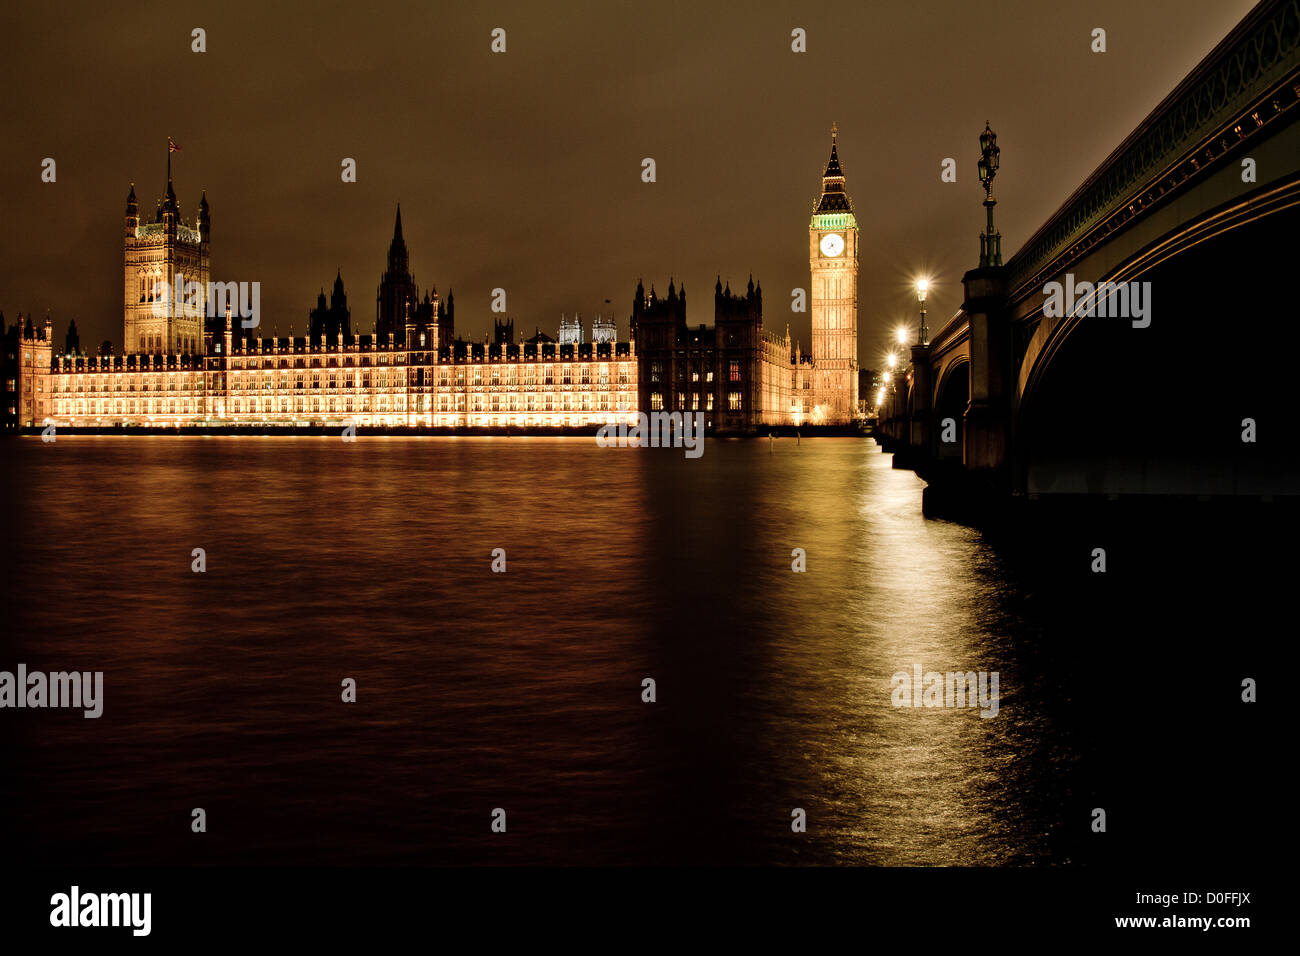 House of Parliament on the River Thames at night. Stock Photo